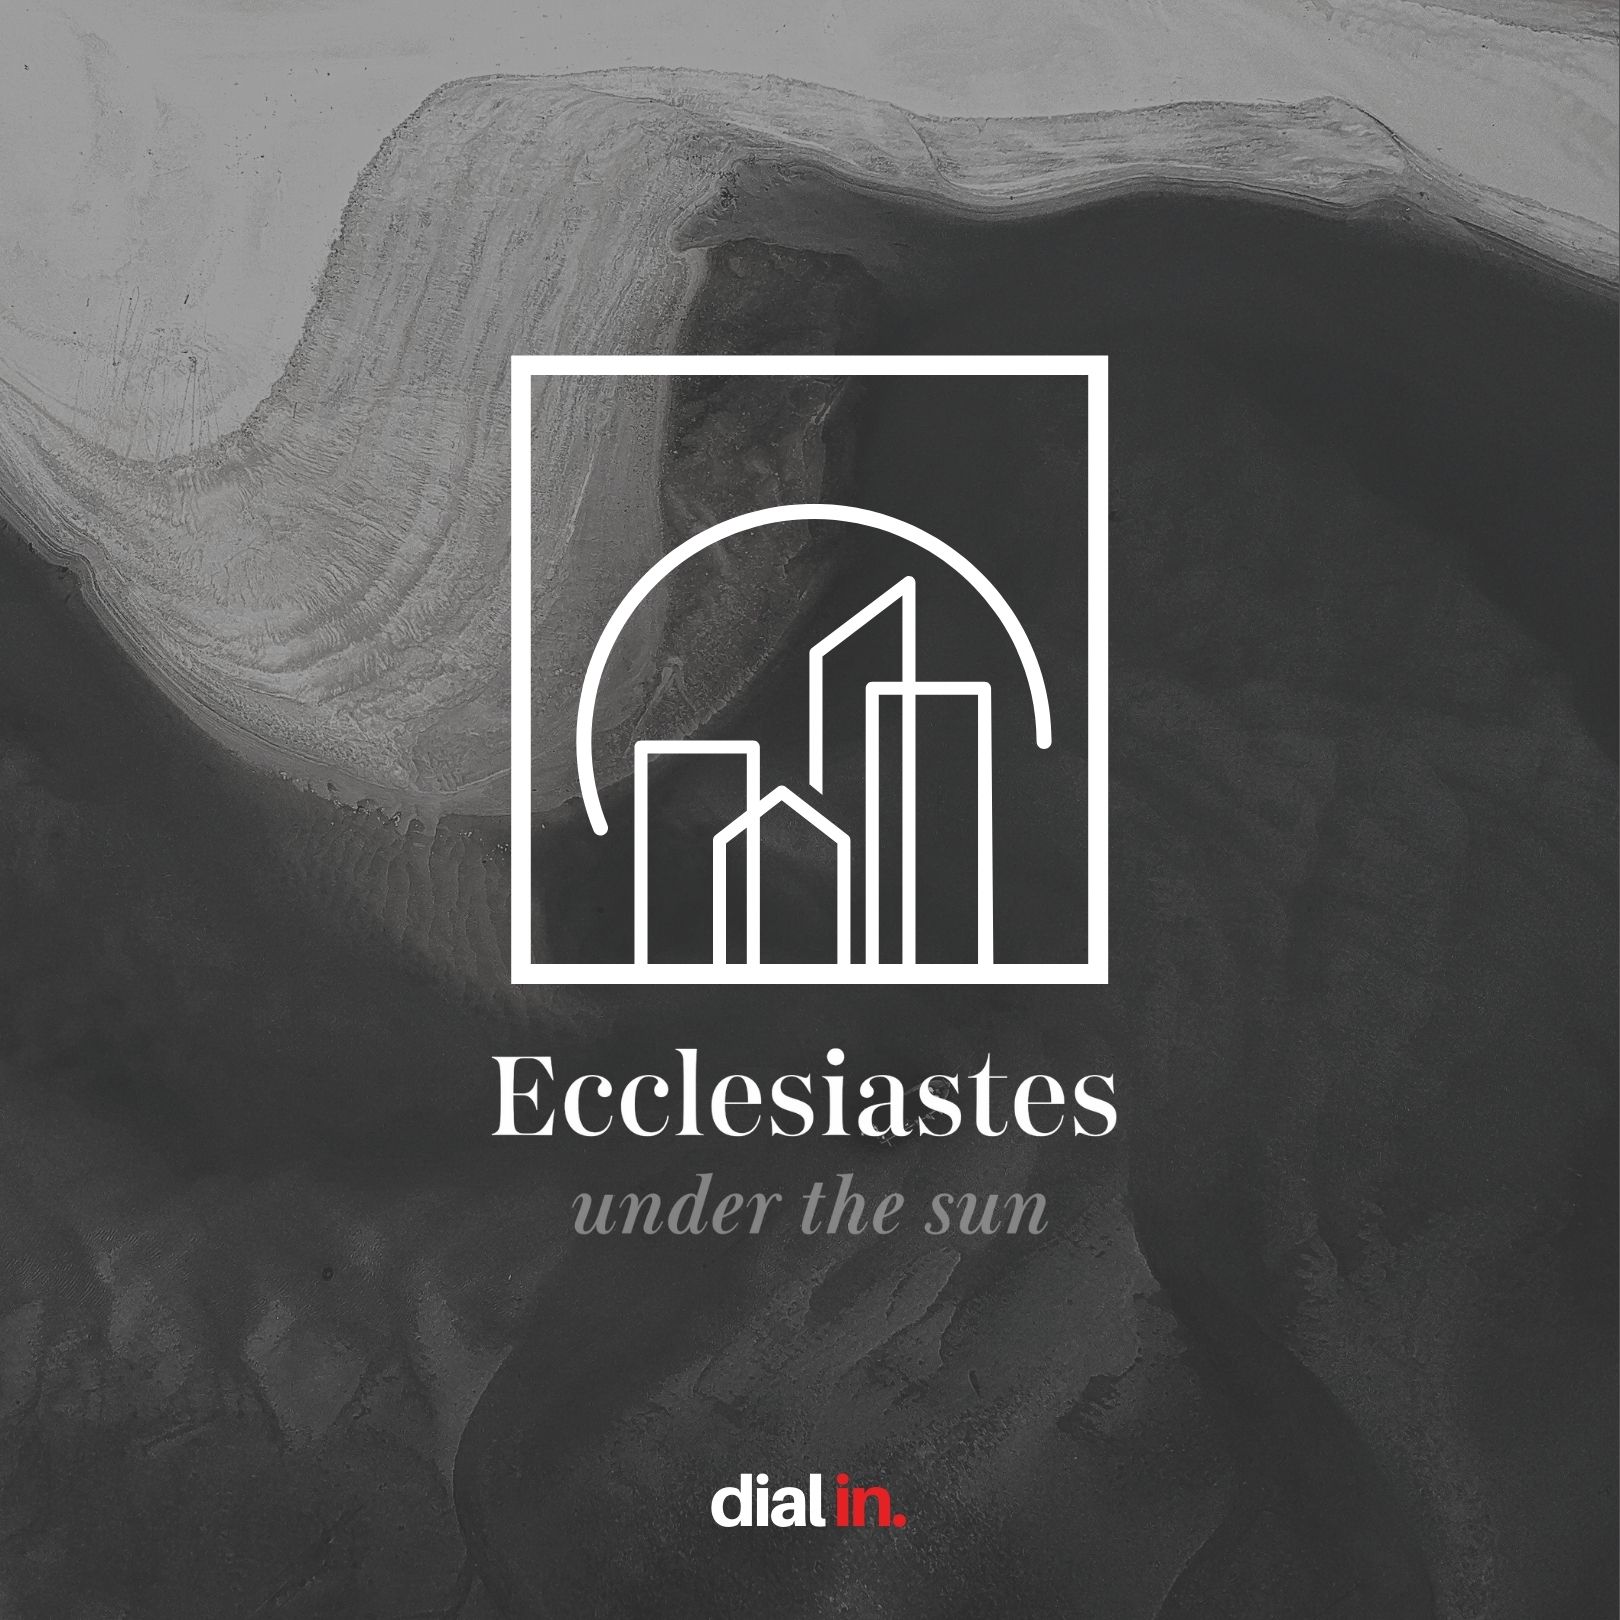 Ecclesiastes 7 - A Date with Death and Nostalgia